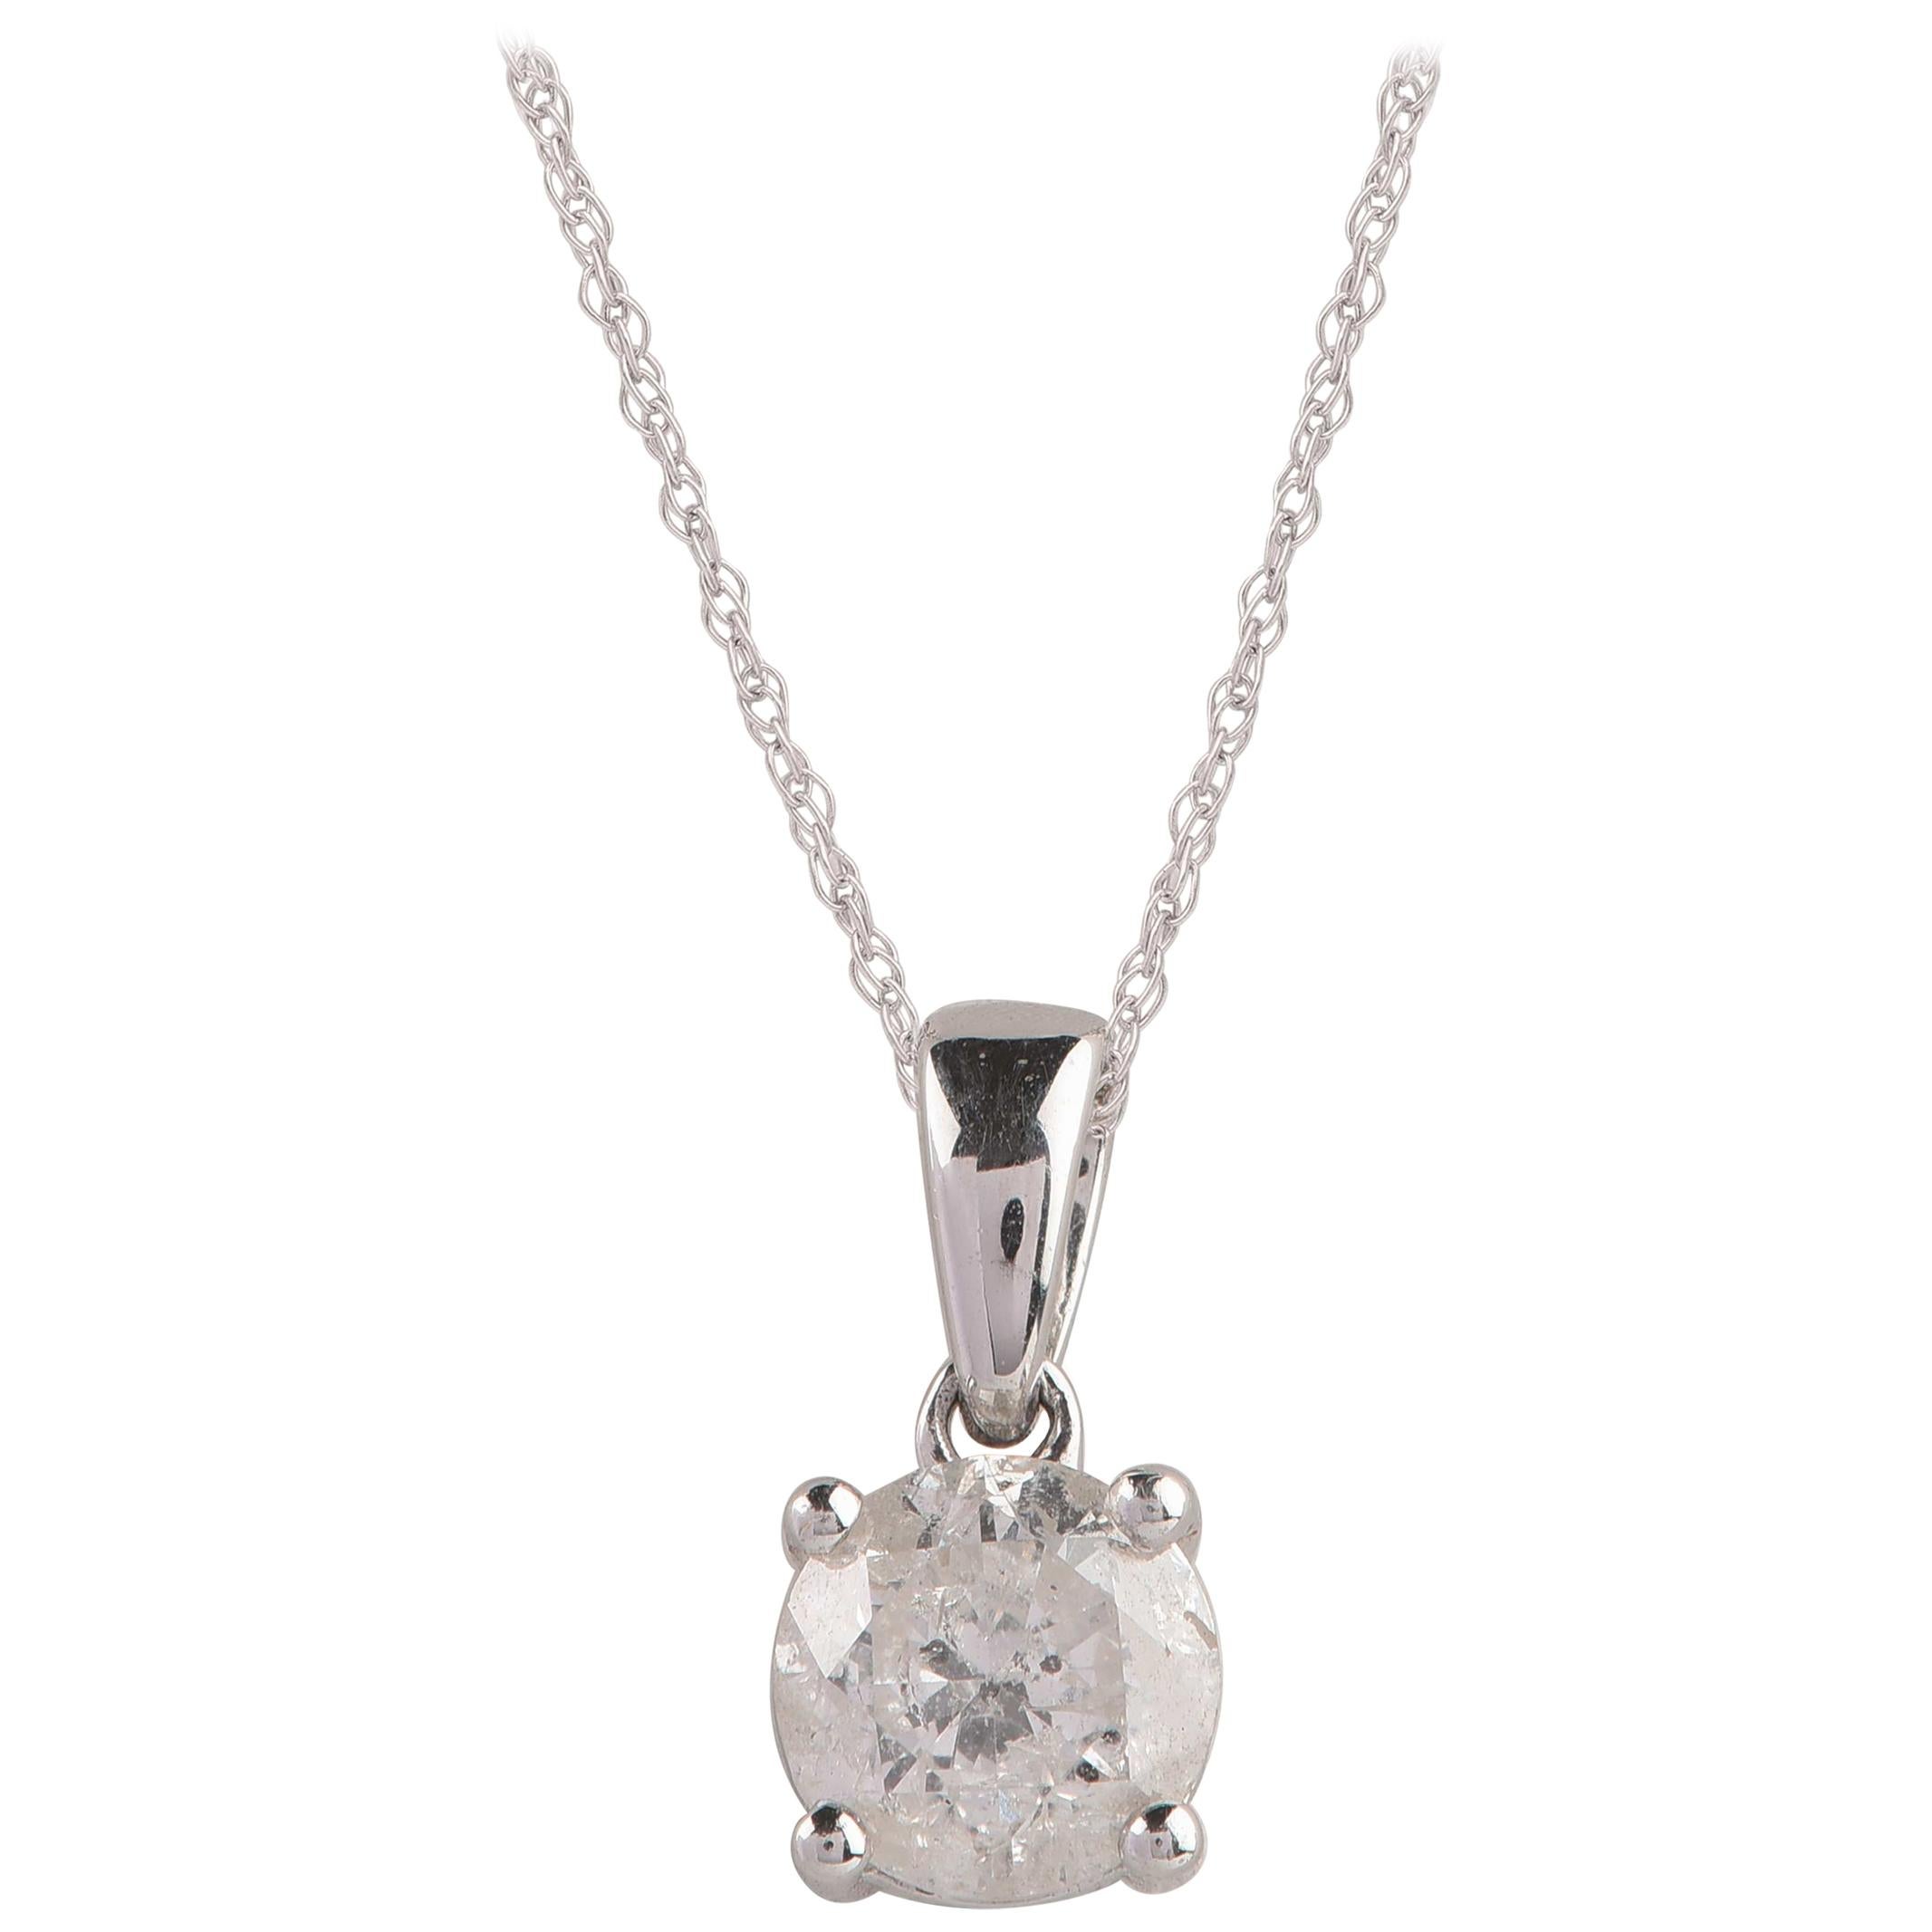 TJD 1.00 Carat Diamond 14 Karat White Gold Solitaire Pendant with 18 inch chain For Sale